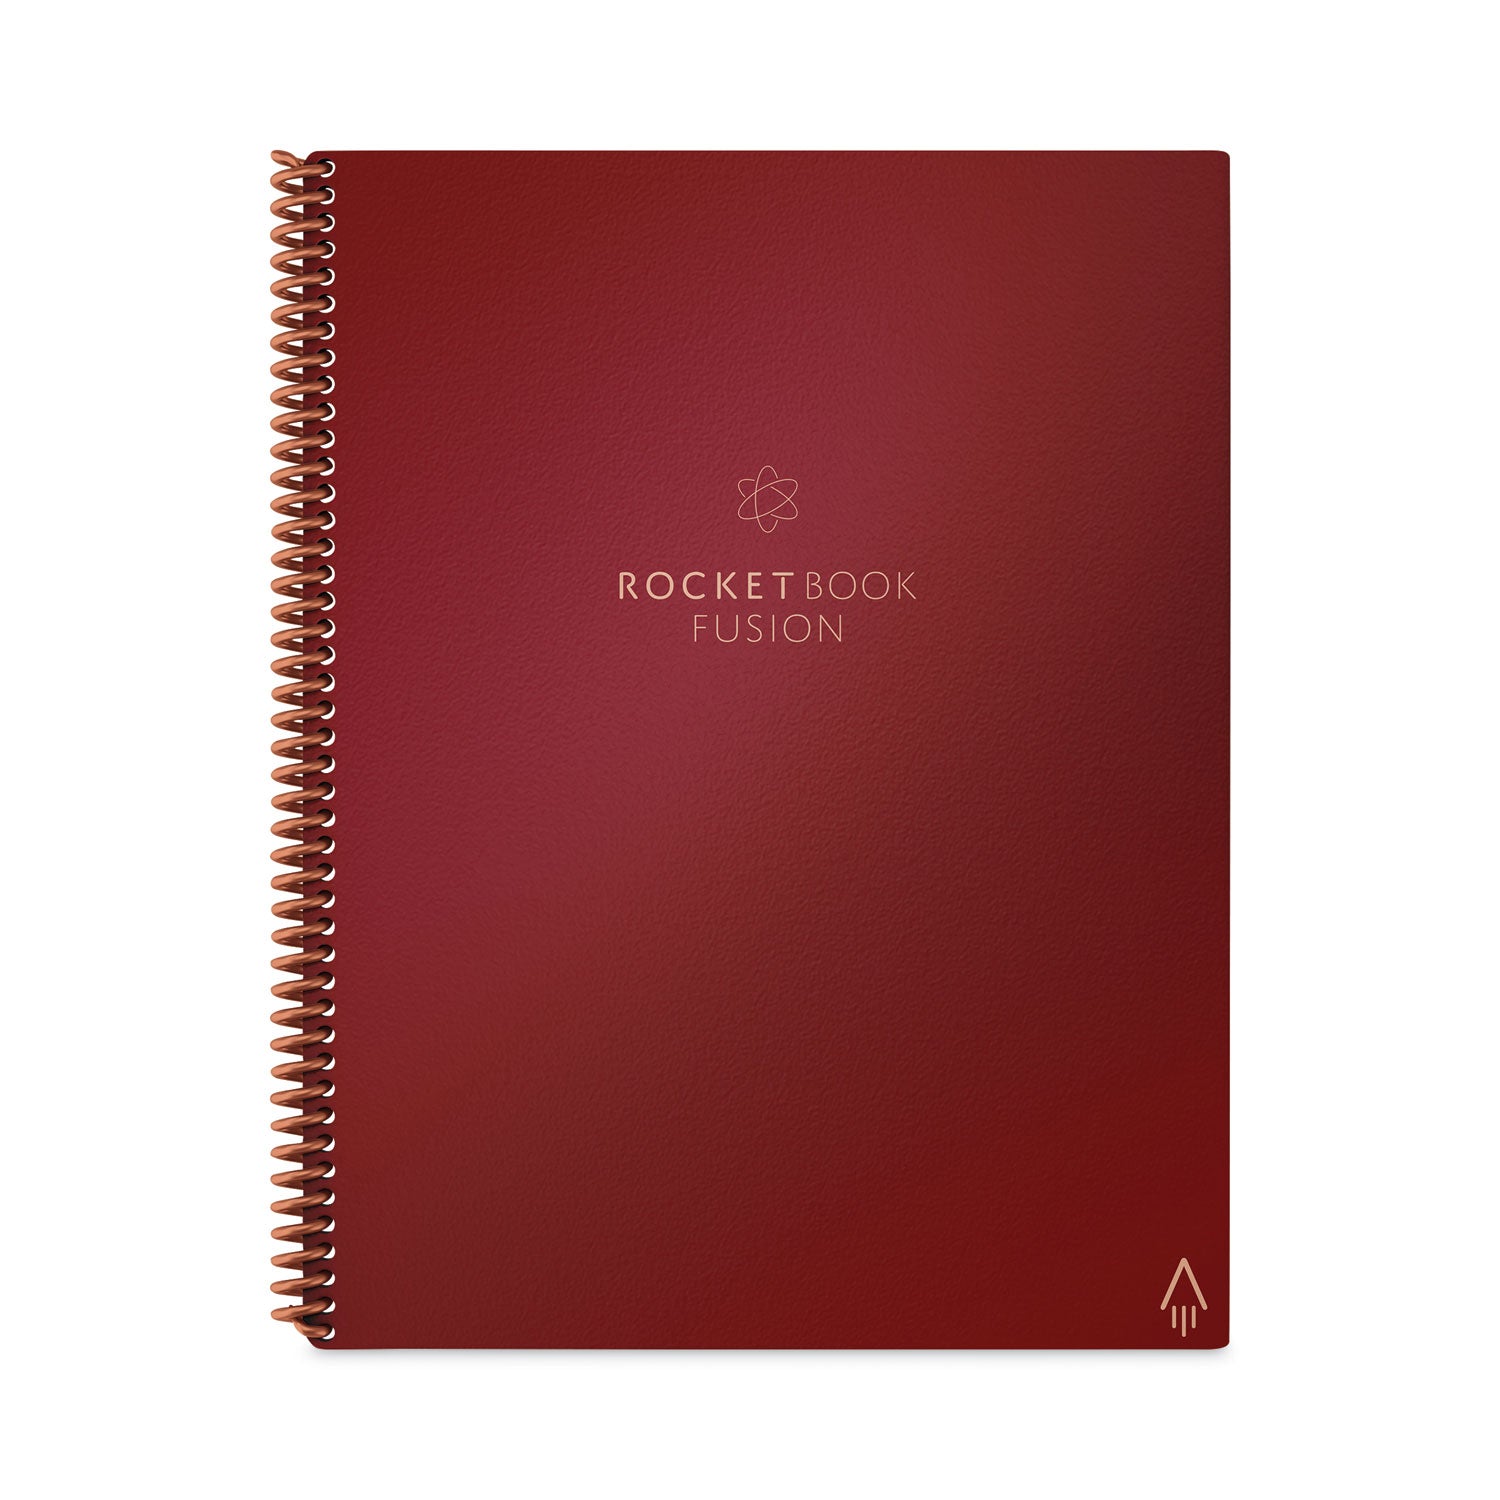 fusion-smart-notebook-seven-assorted-page-formats-scarlet-sky-cover-21-11-x-85-sheets_rkbevrflrccmefr - 2